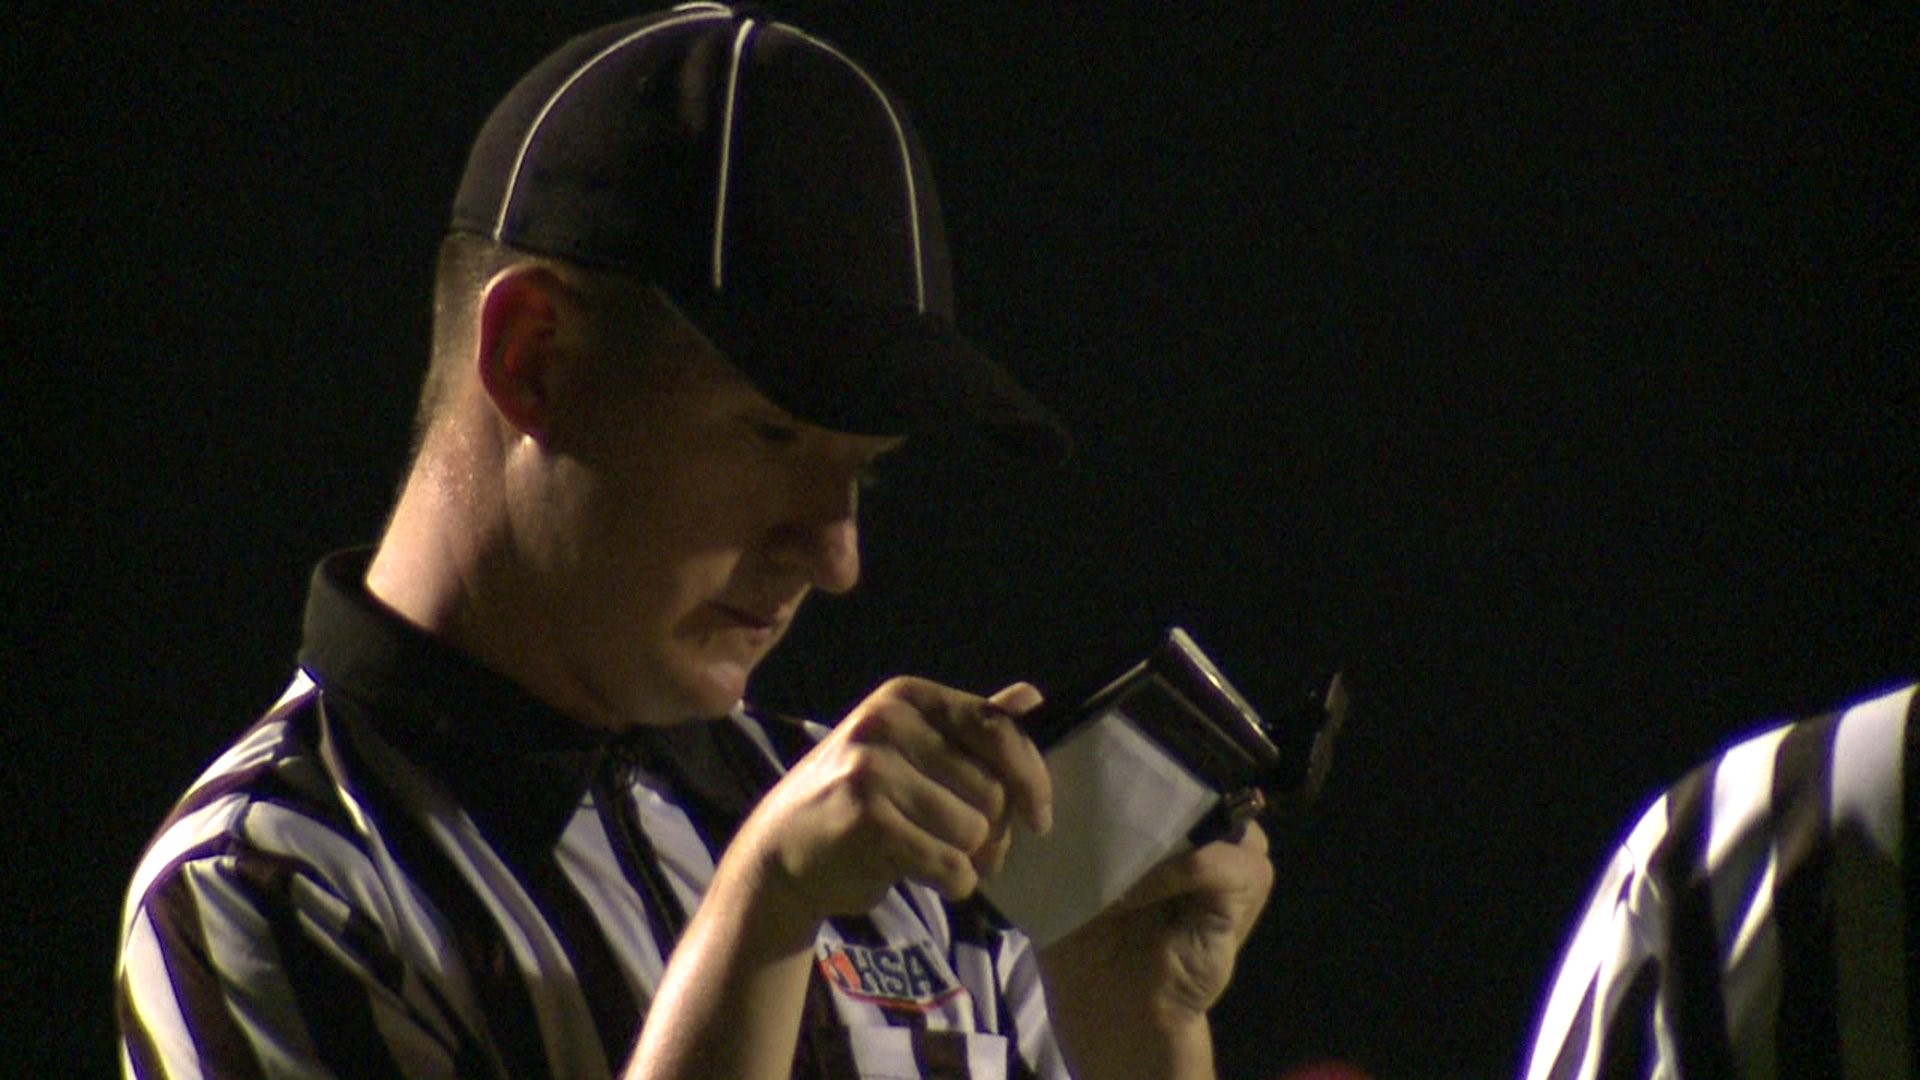 Local boy inspires fans, players under the Friday night lights